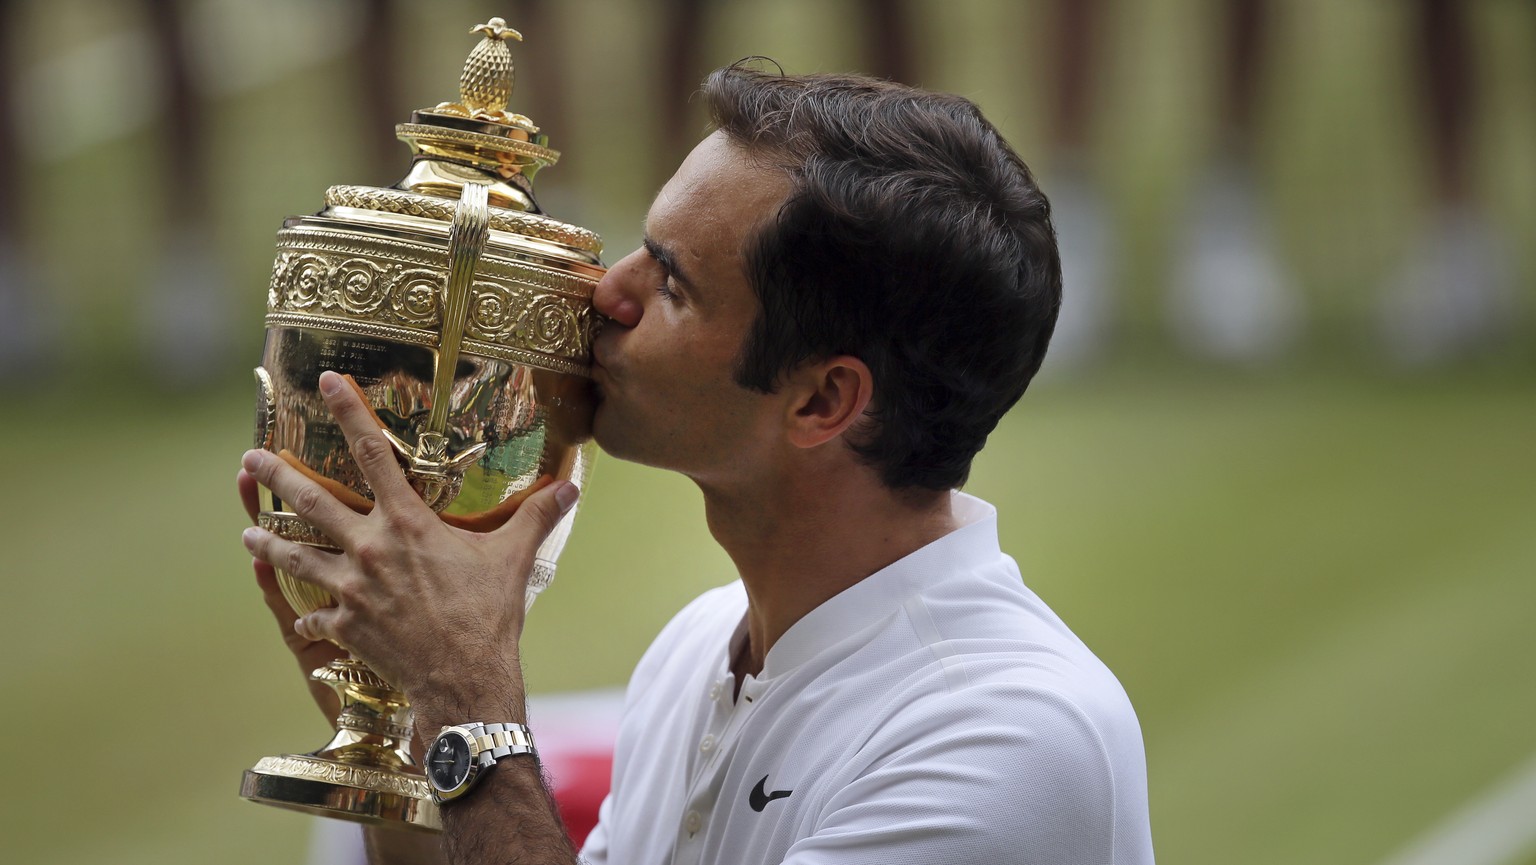 Switzerland&#039;s Roger Federer celebrates with the trophy after beating Croatia&#039;s Marin Cilic in the Men&#039;s Singles final match on day thirteen at the Wimbledon Tennis Championships in Lond ...